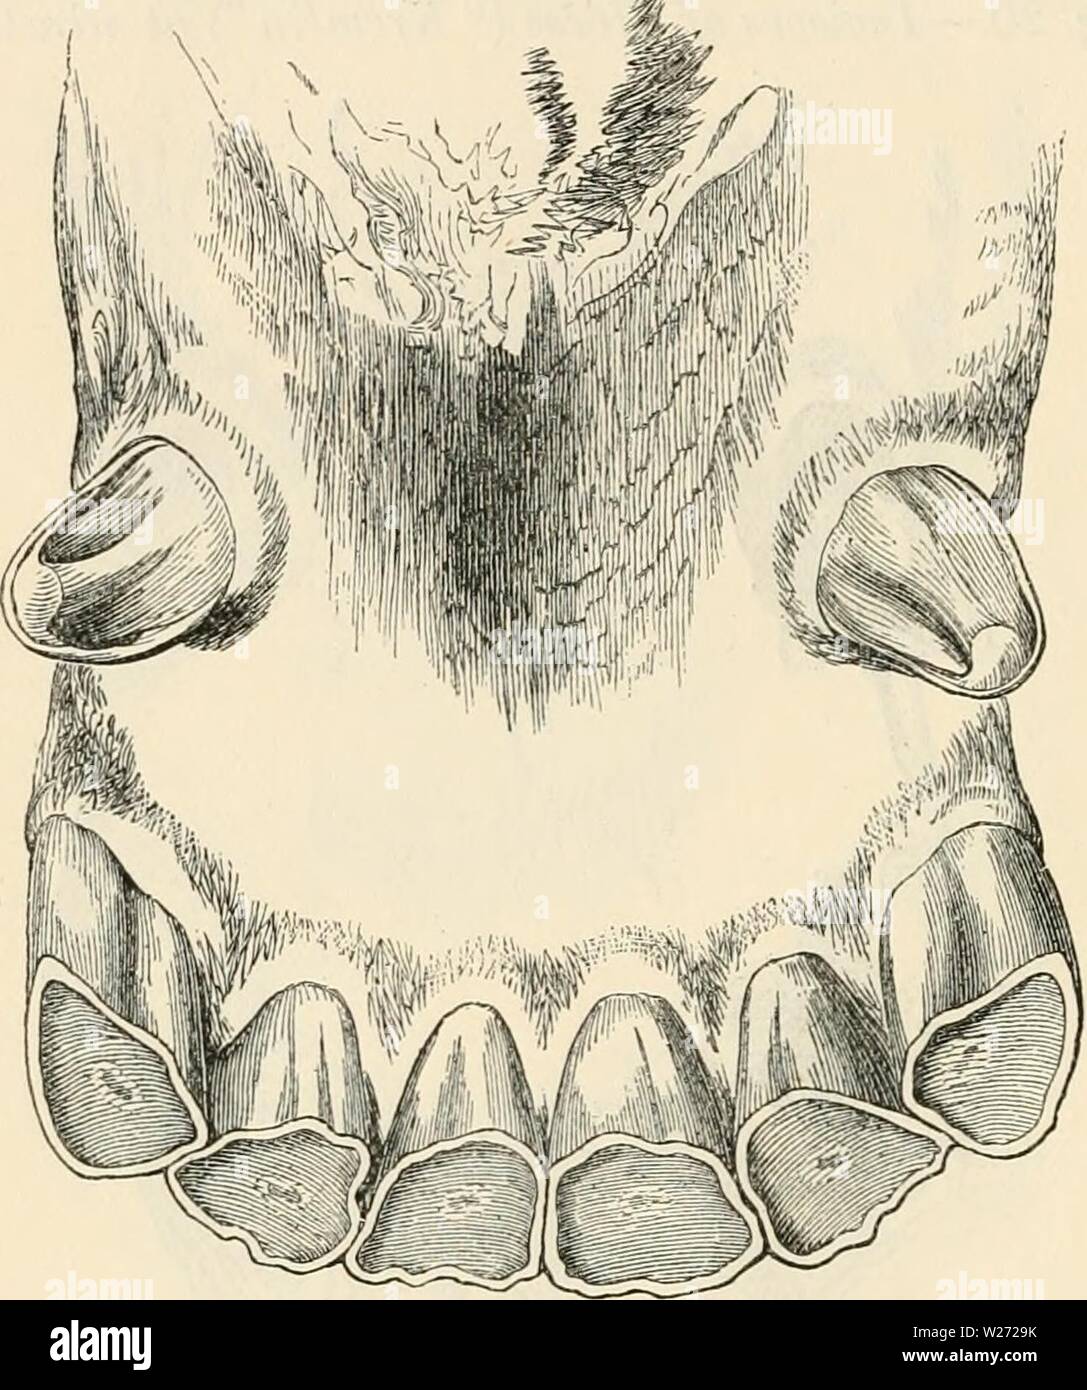 Archive image from page 33 of Dentition as indicative of the Stock Photo